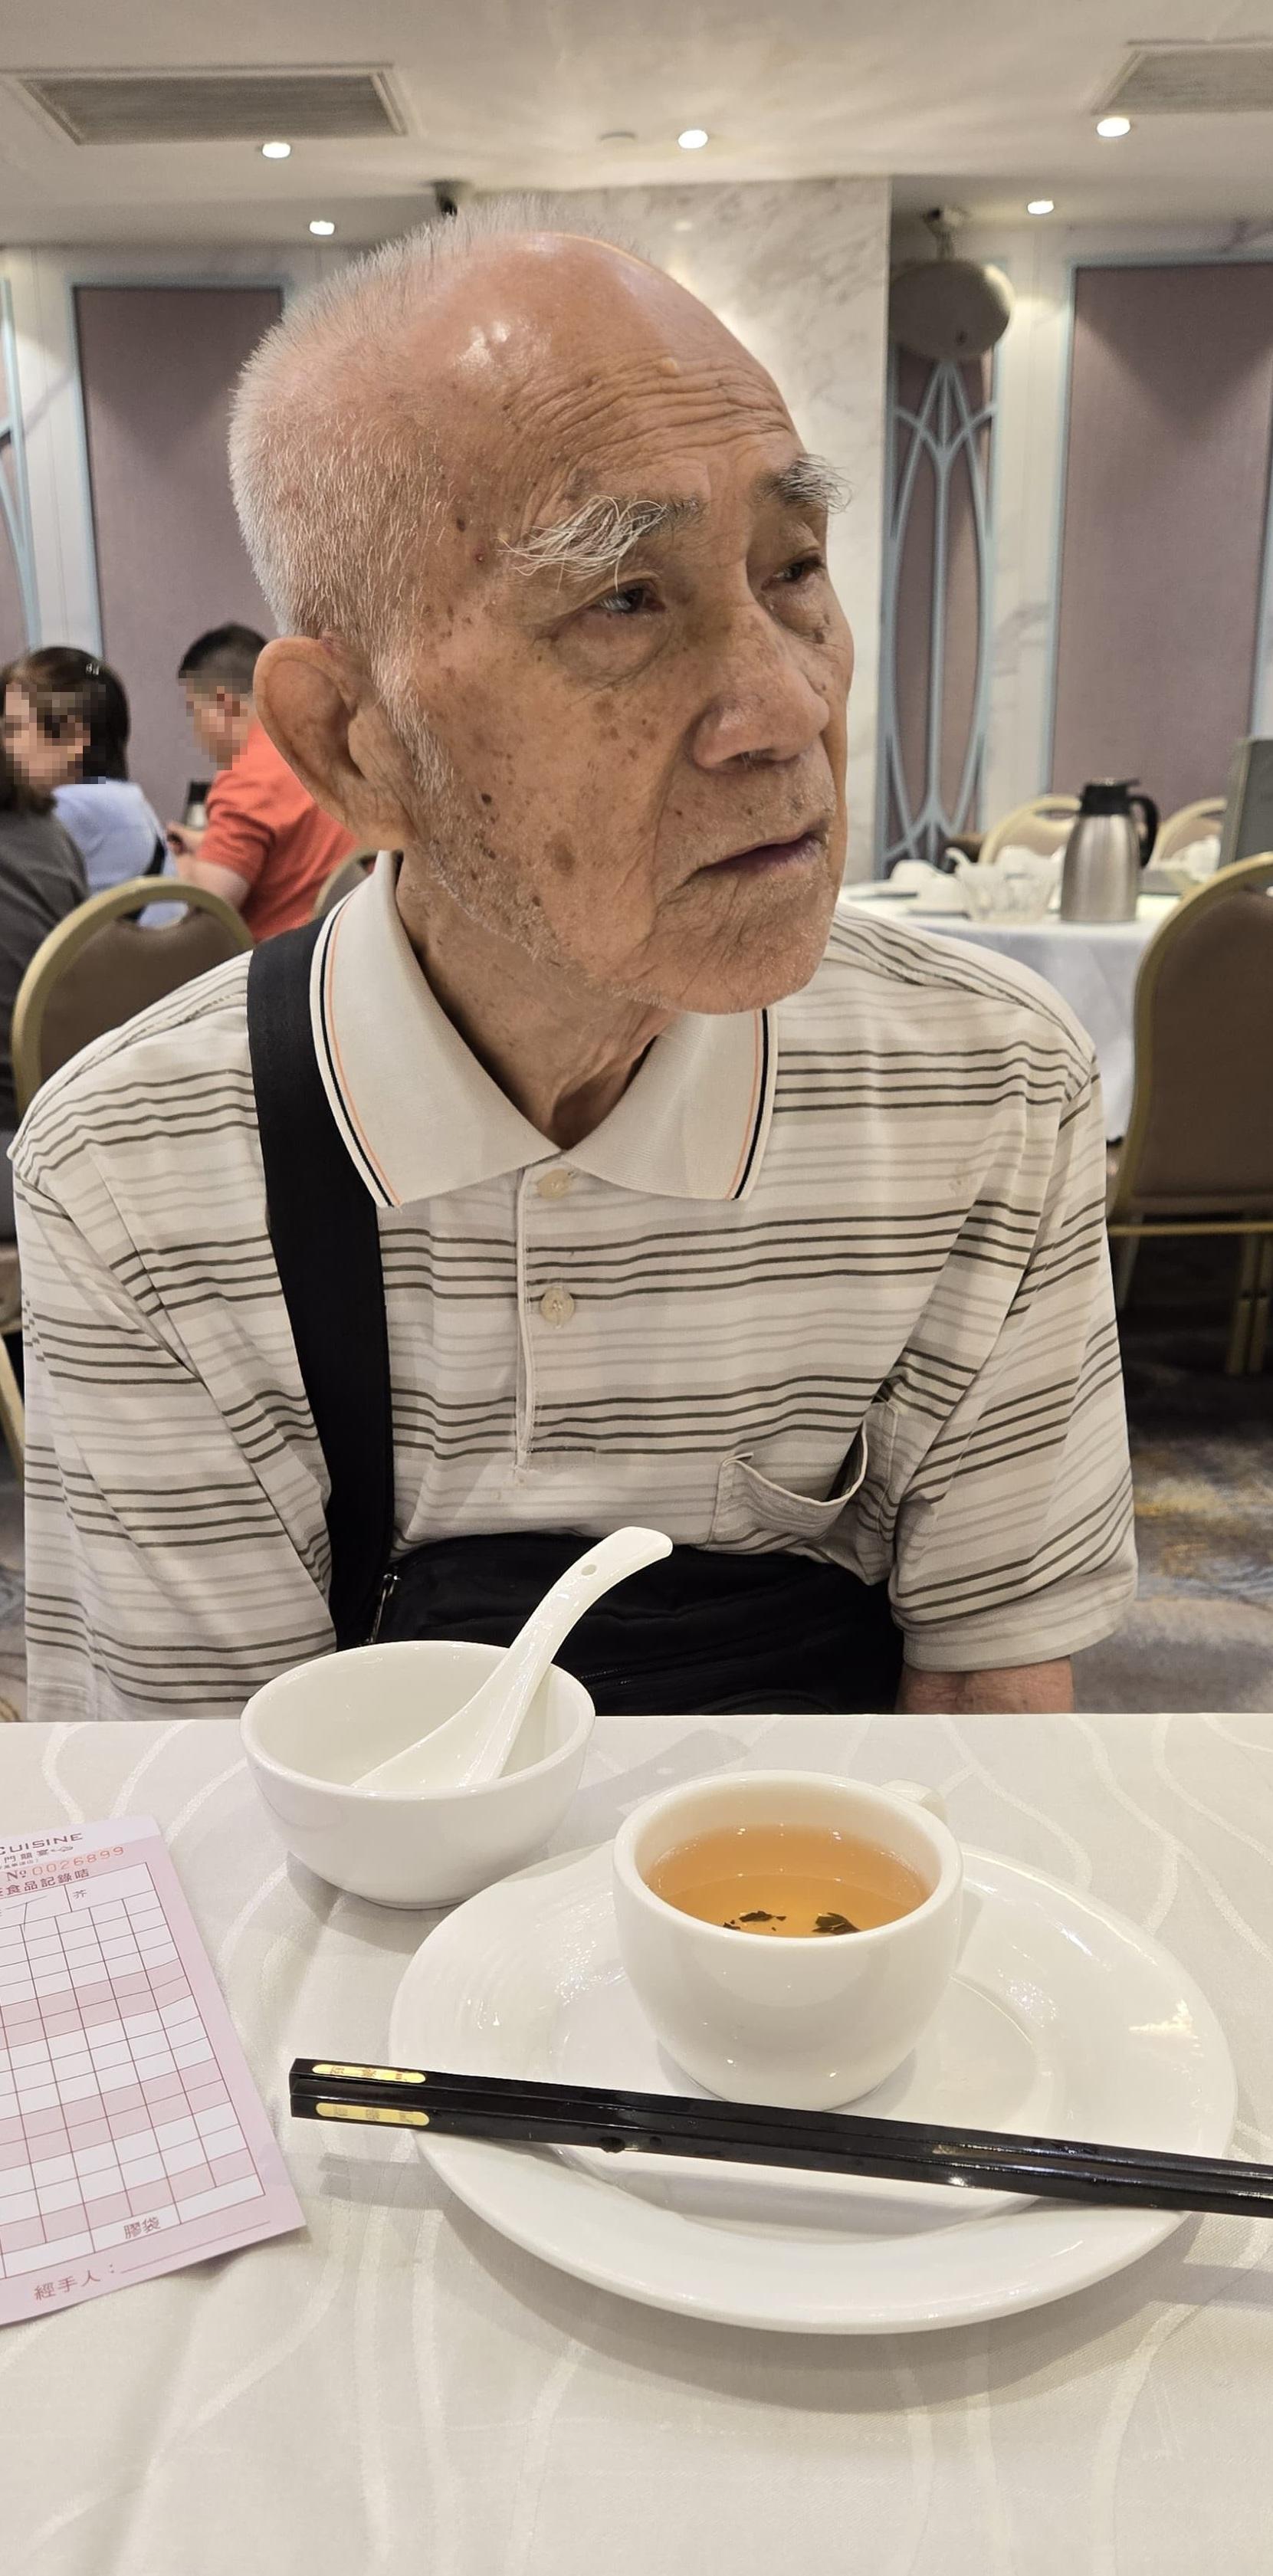 Wong Yau-shing, aged 87, is about 1.6 metres tall, 55 kilograms in weight and of thin build. He has a long-shaped face with yellow complexion and short white hair. He was last seen wearing a grey and white striped T-shirt, black trousers, black shoes and carrying a crossbody bag.